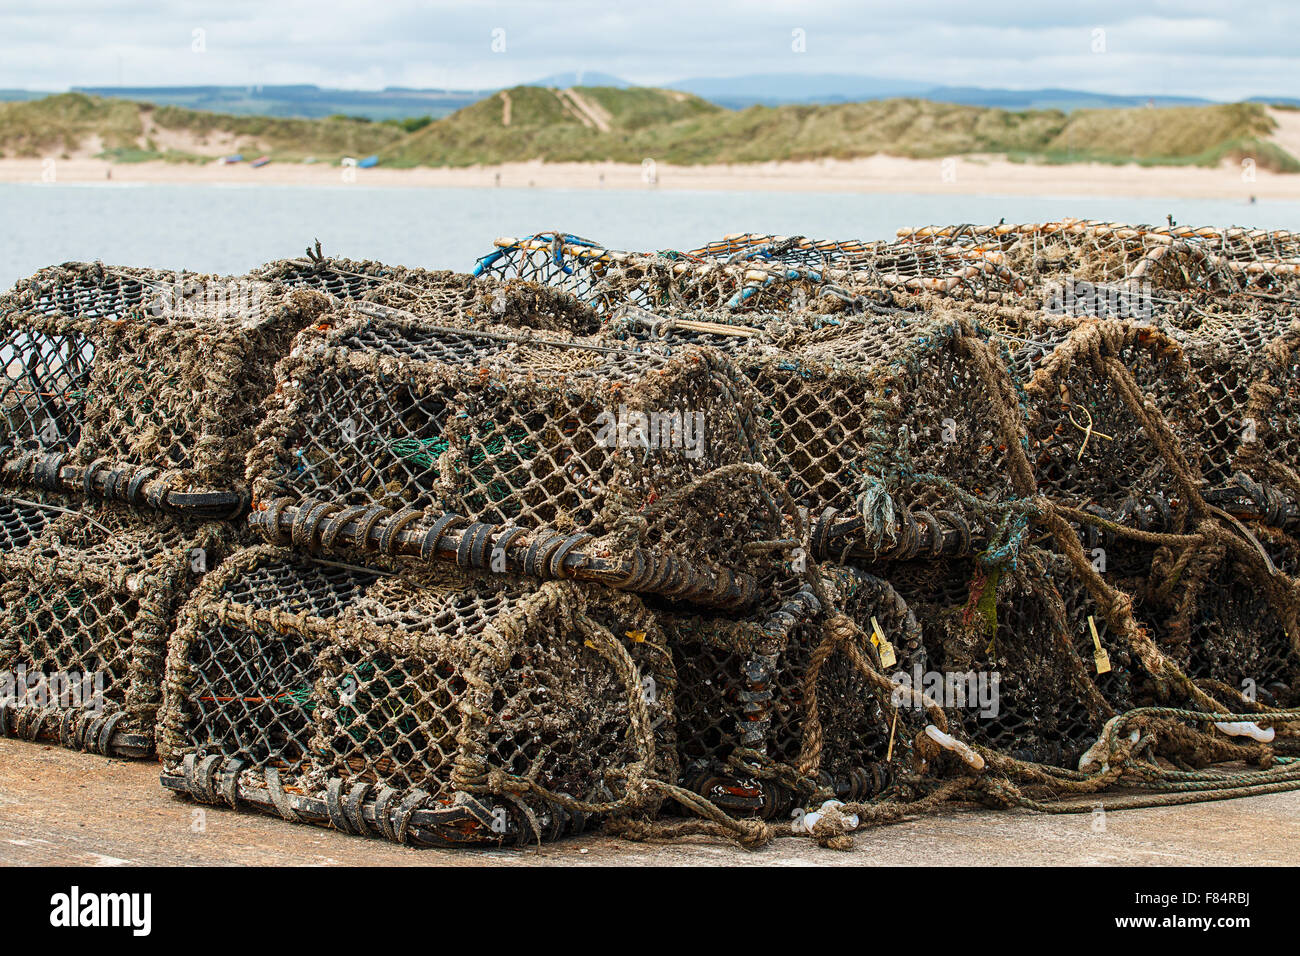 Lobster pots stacked in pile on a harbour with a sandy bay in the background Stock Photo